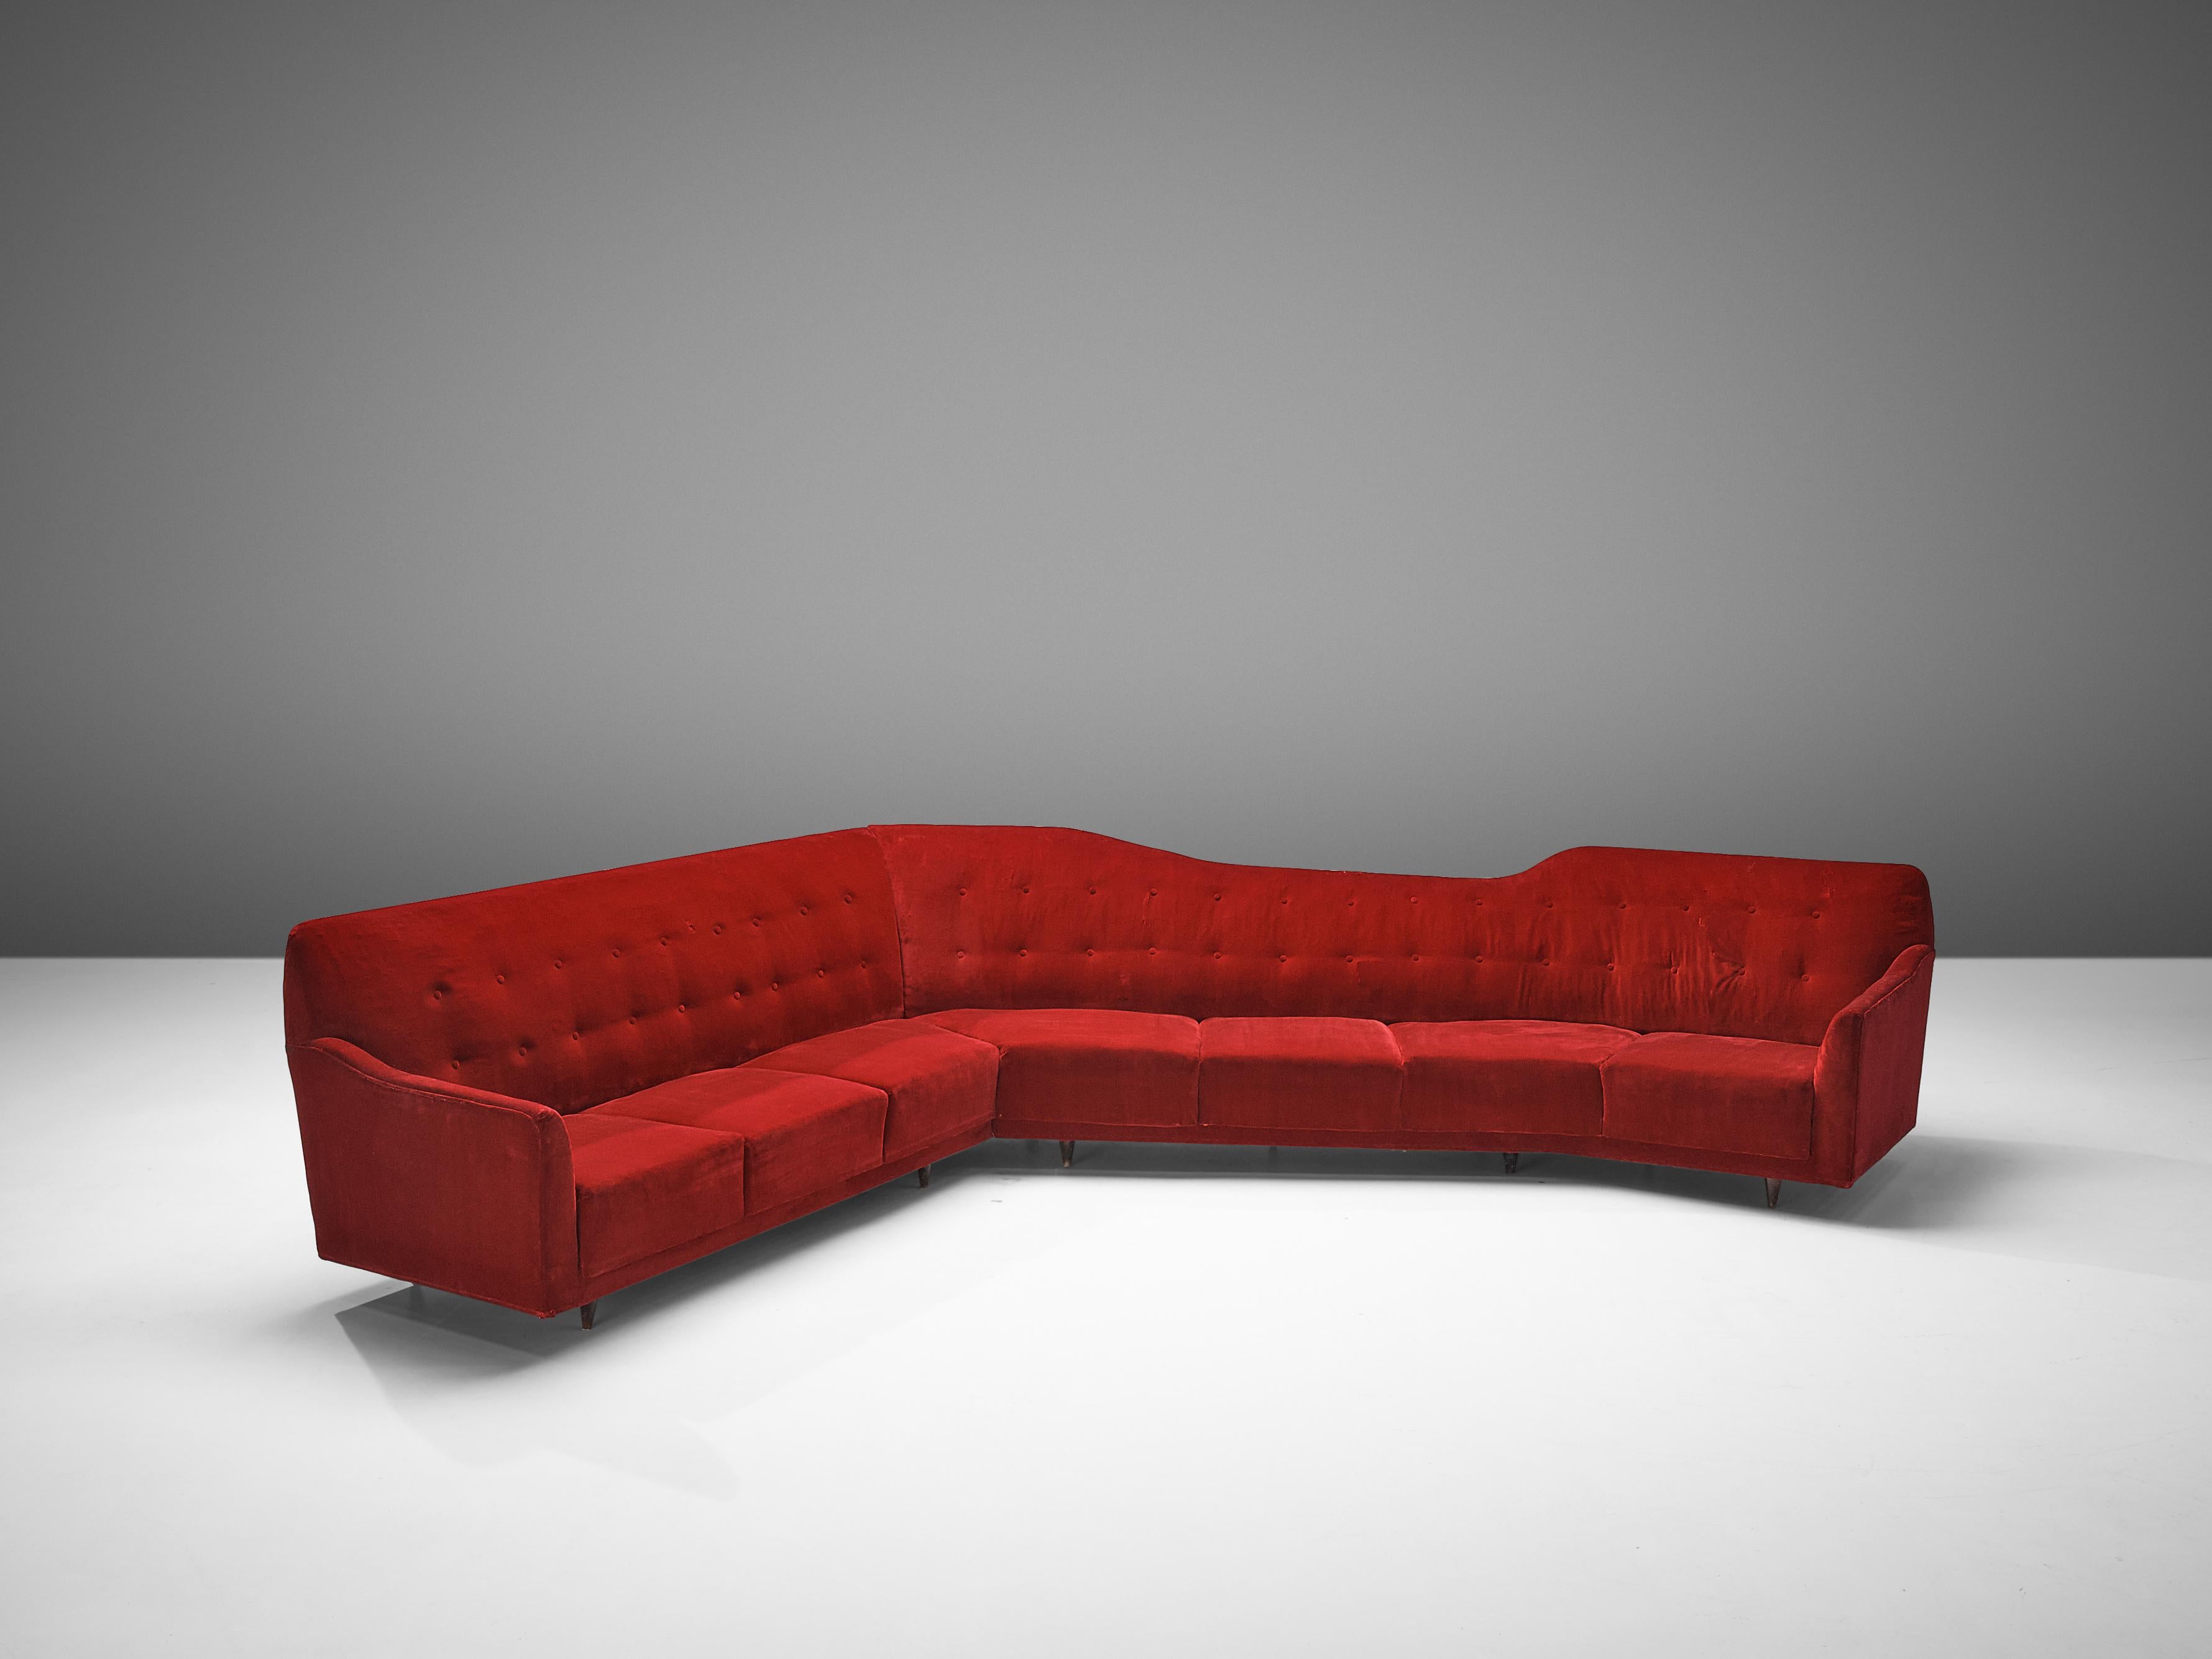 Sofa, red velvet upholstery, Italy, 1950s

Beautiful and very spacious sofa made in Italy in the 1950s. This corner sofa is an eye-catching piece that has all the characteristics of mid modern design. Not only does the sofa have an interesting